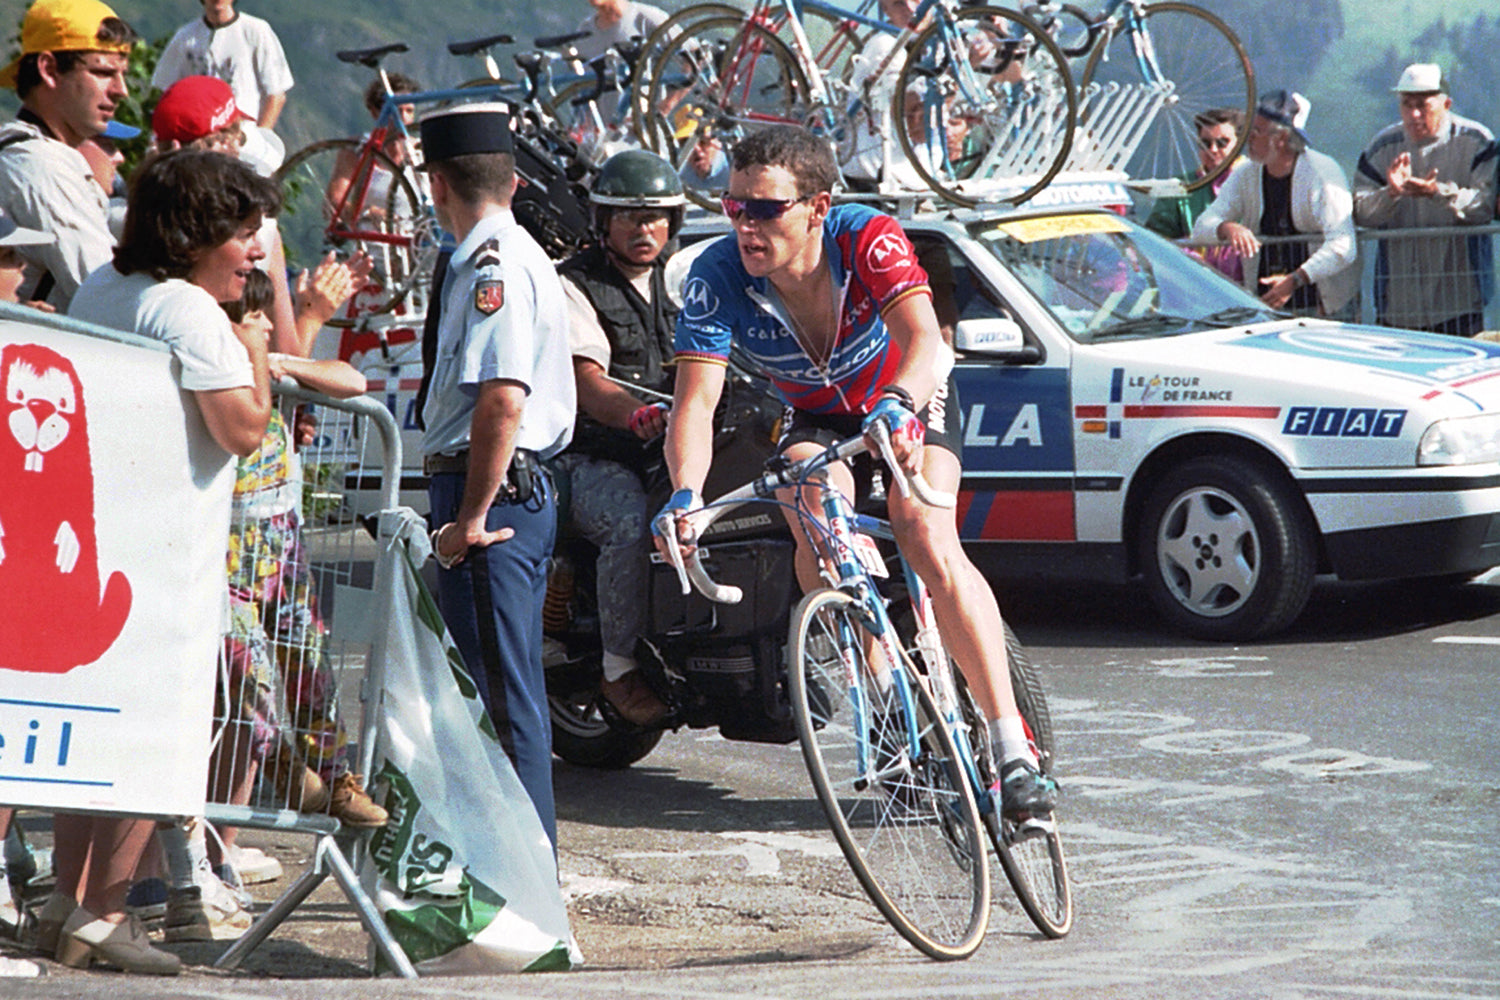 Lance Armstrong (Motorola Cycling Team) riding during the 1995 Tour de France. Photo: Fotoreporter Sirotti.